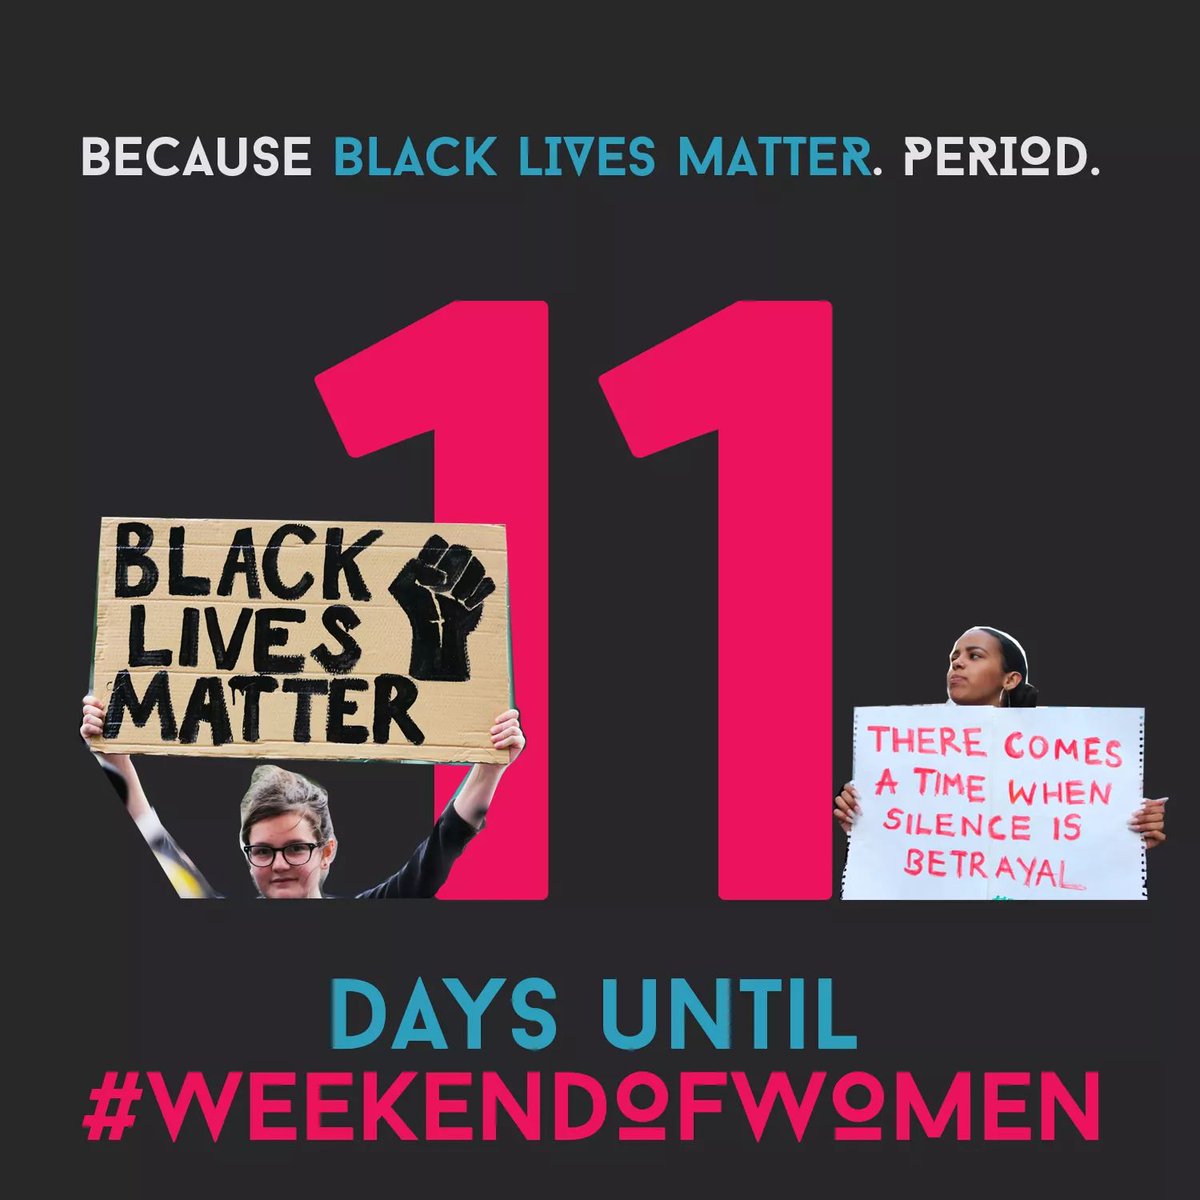 Period.

There are so many reasons to join us on January 20th.

March in Little Rock.
bit.ly/MarchOnArkansa…

#WeekendofWomen #MarchOnThePolls #BlackLivesMatter #MarchOnArkansas